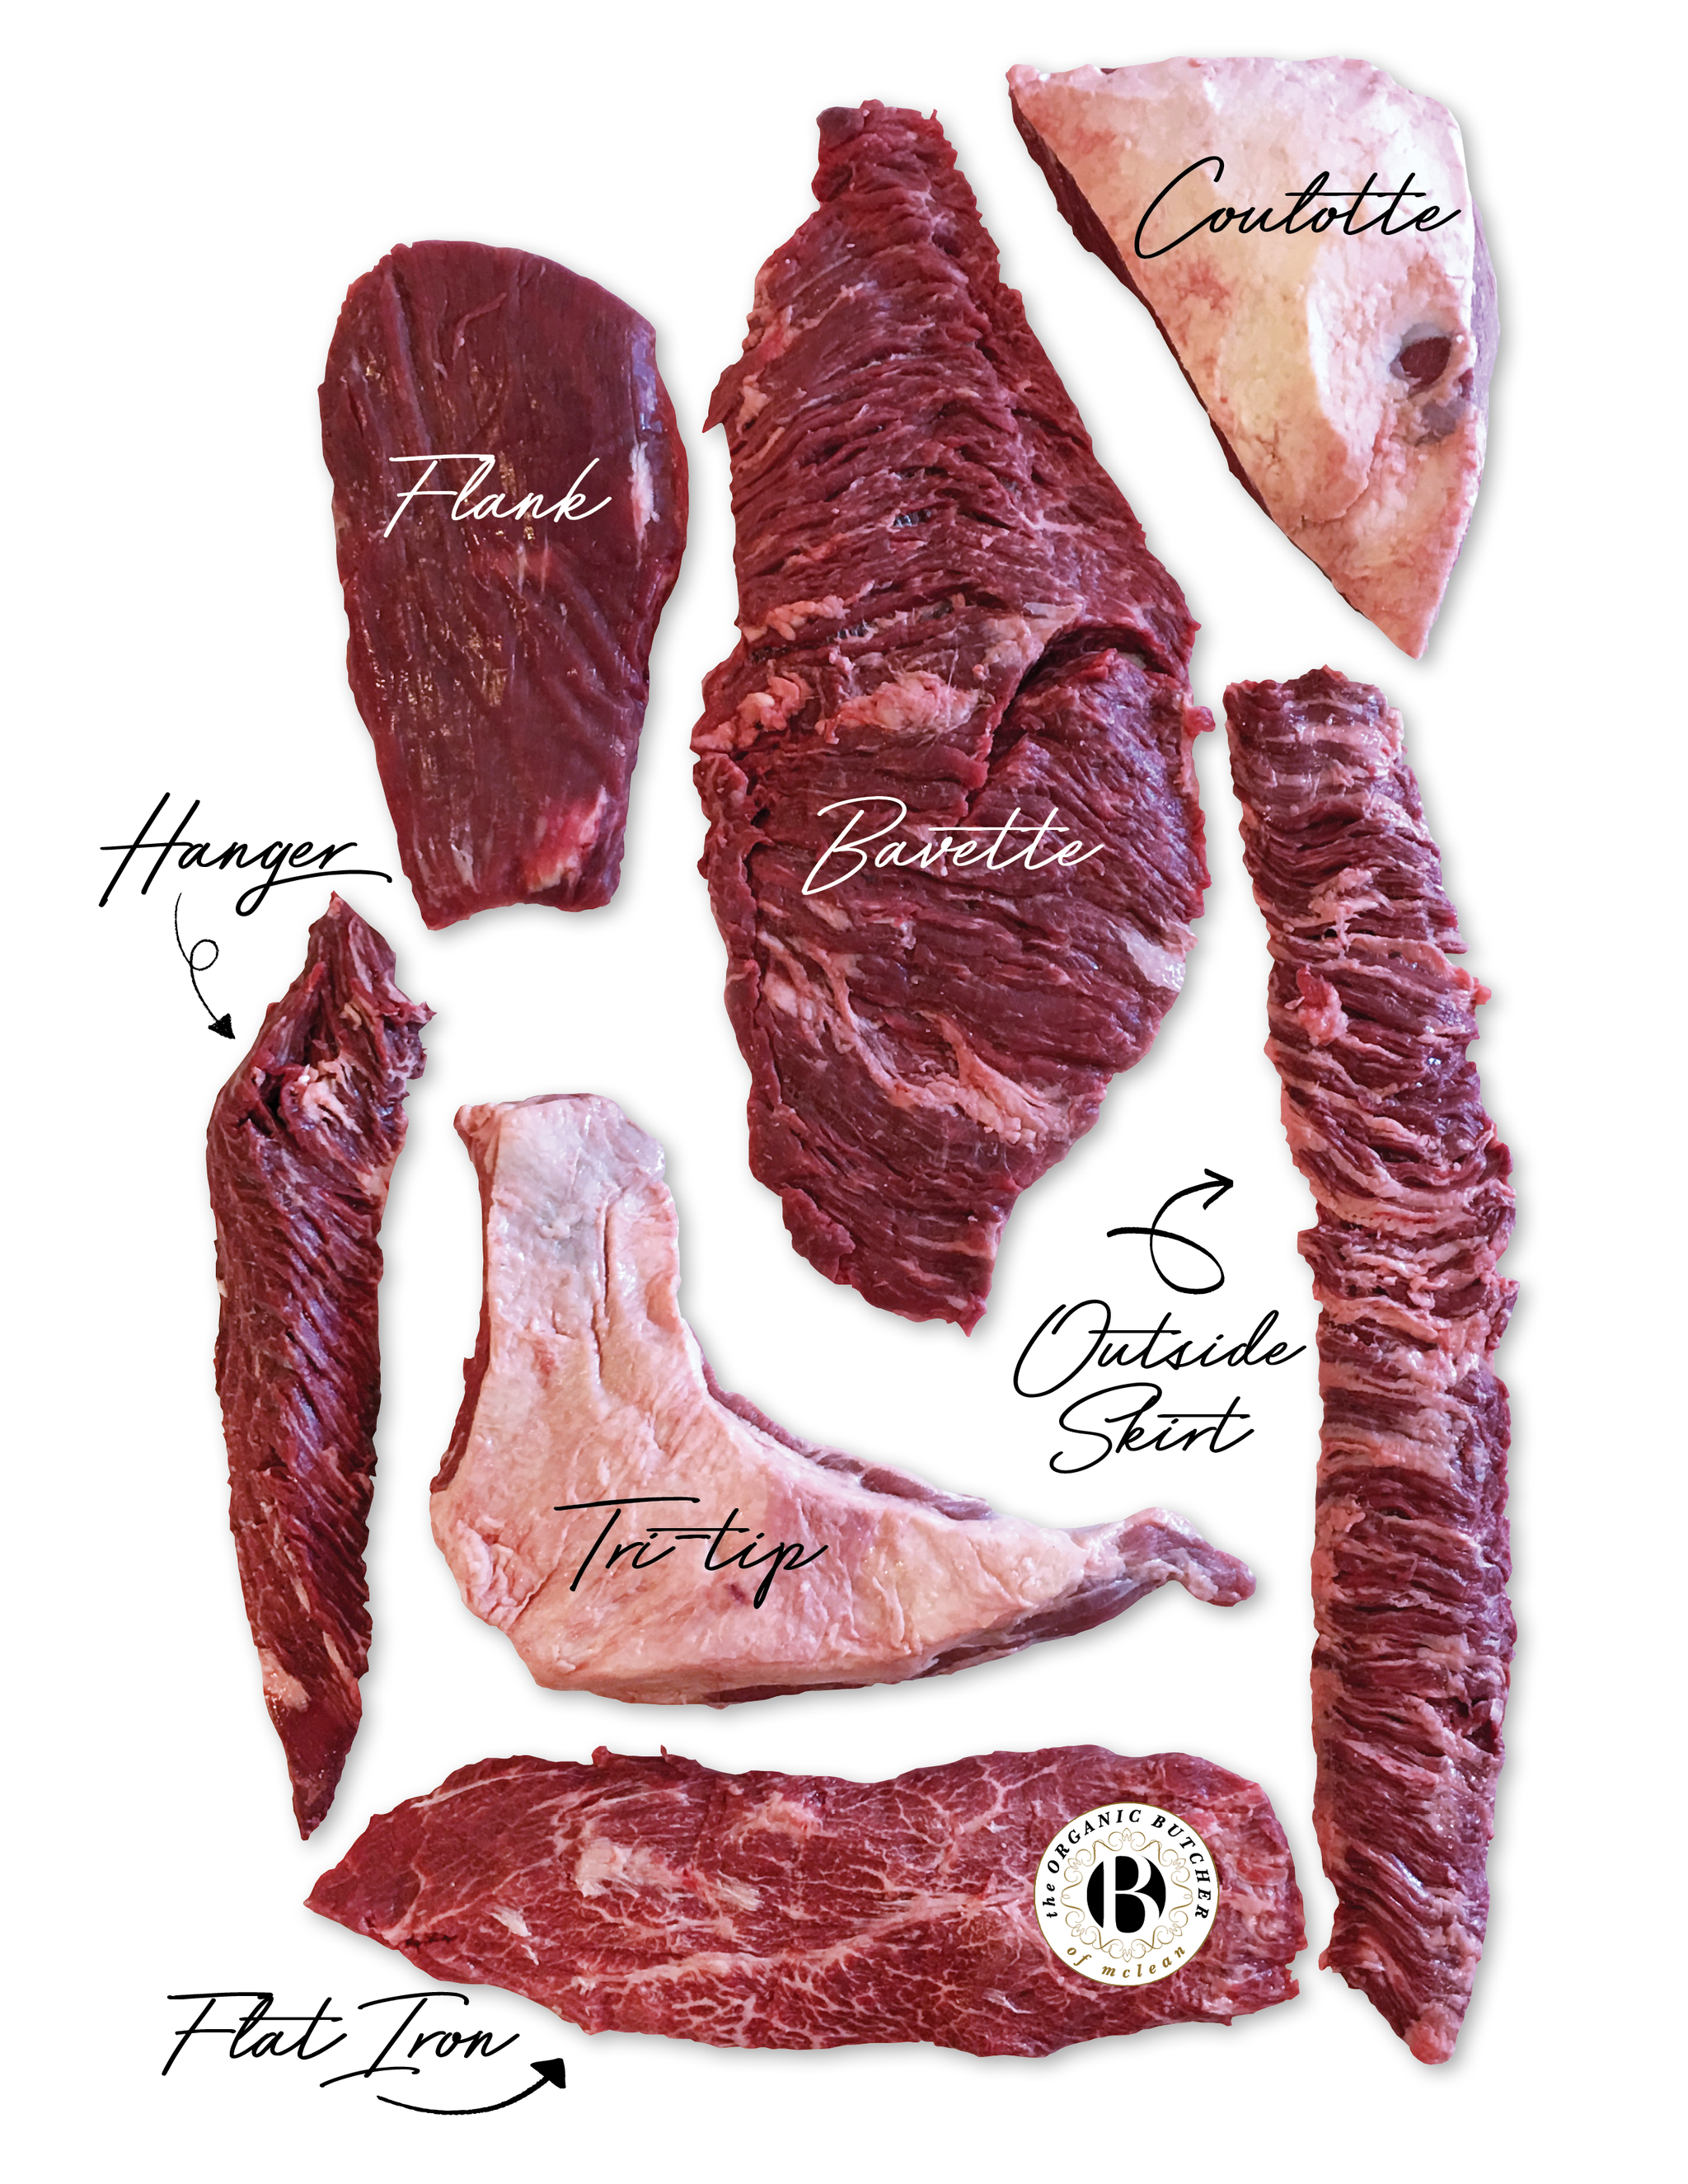 What's the Difference Between Skirt, Flank, Hanger, and Flatiron Steak?